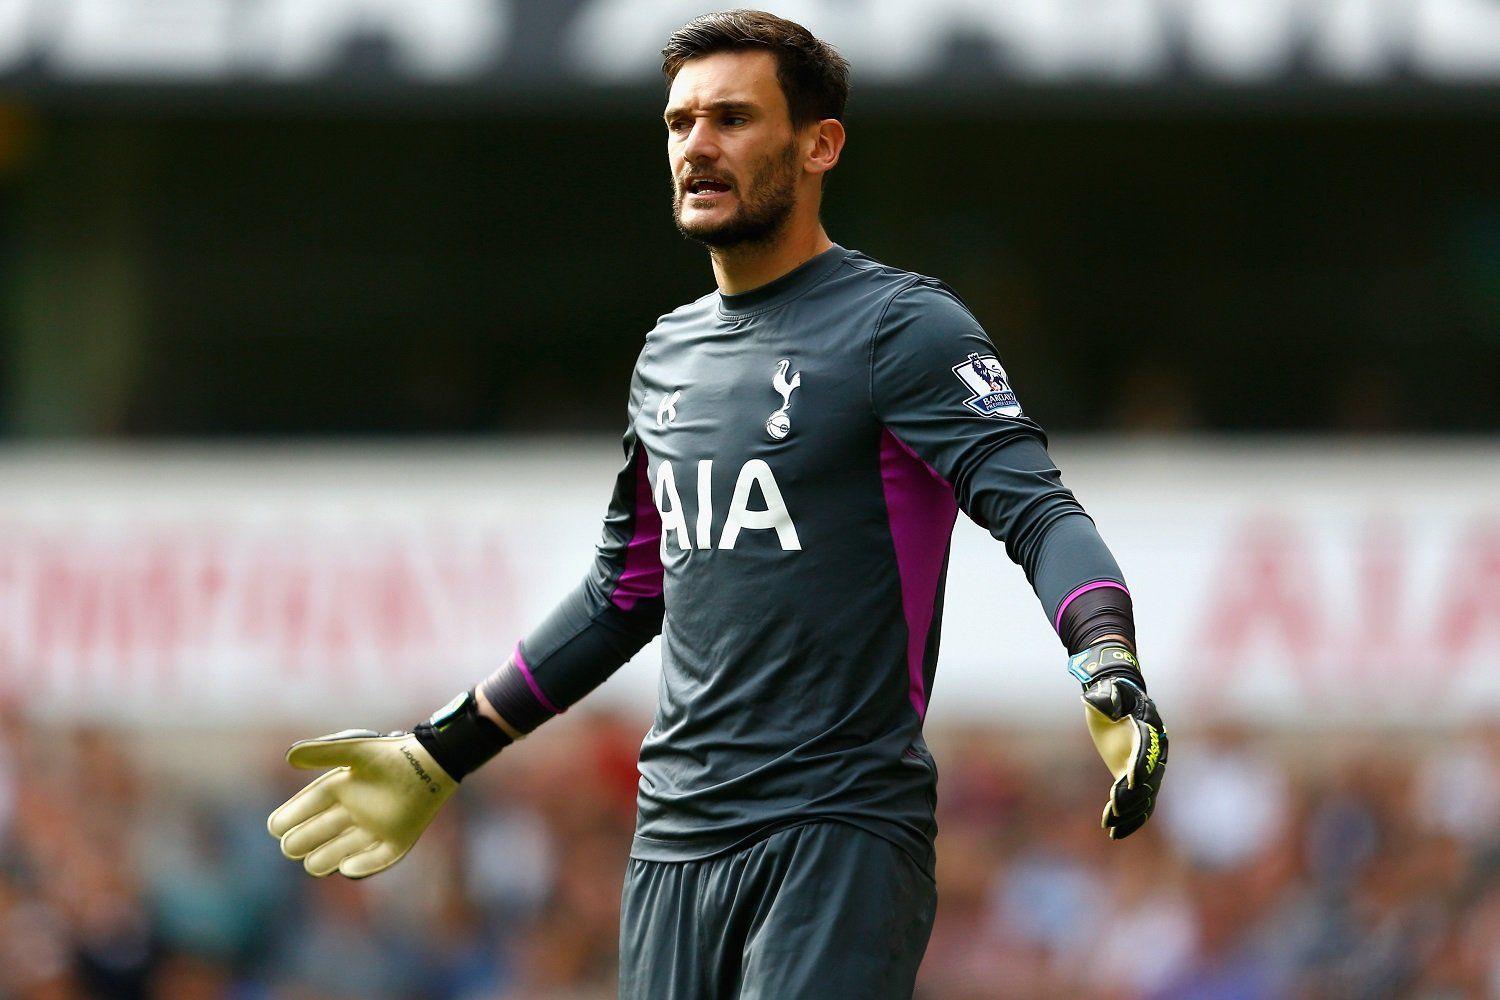 Hugo Lloris is 'one of the best goalkeepers in the world', says